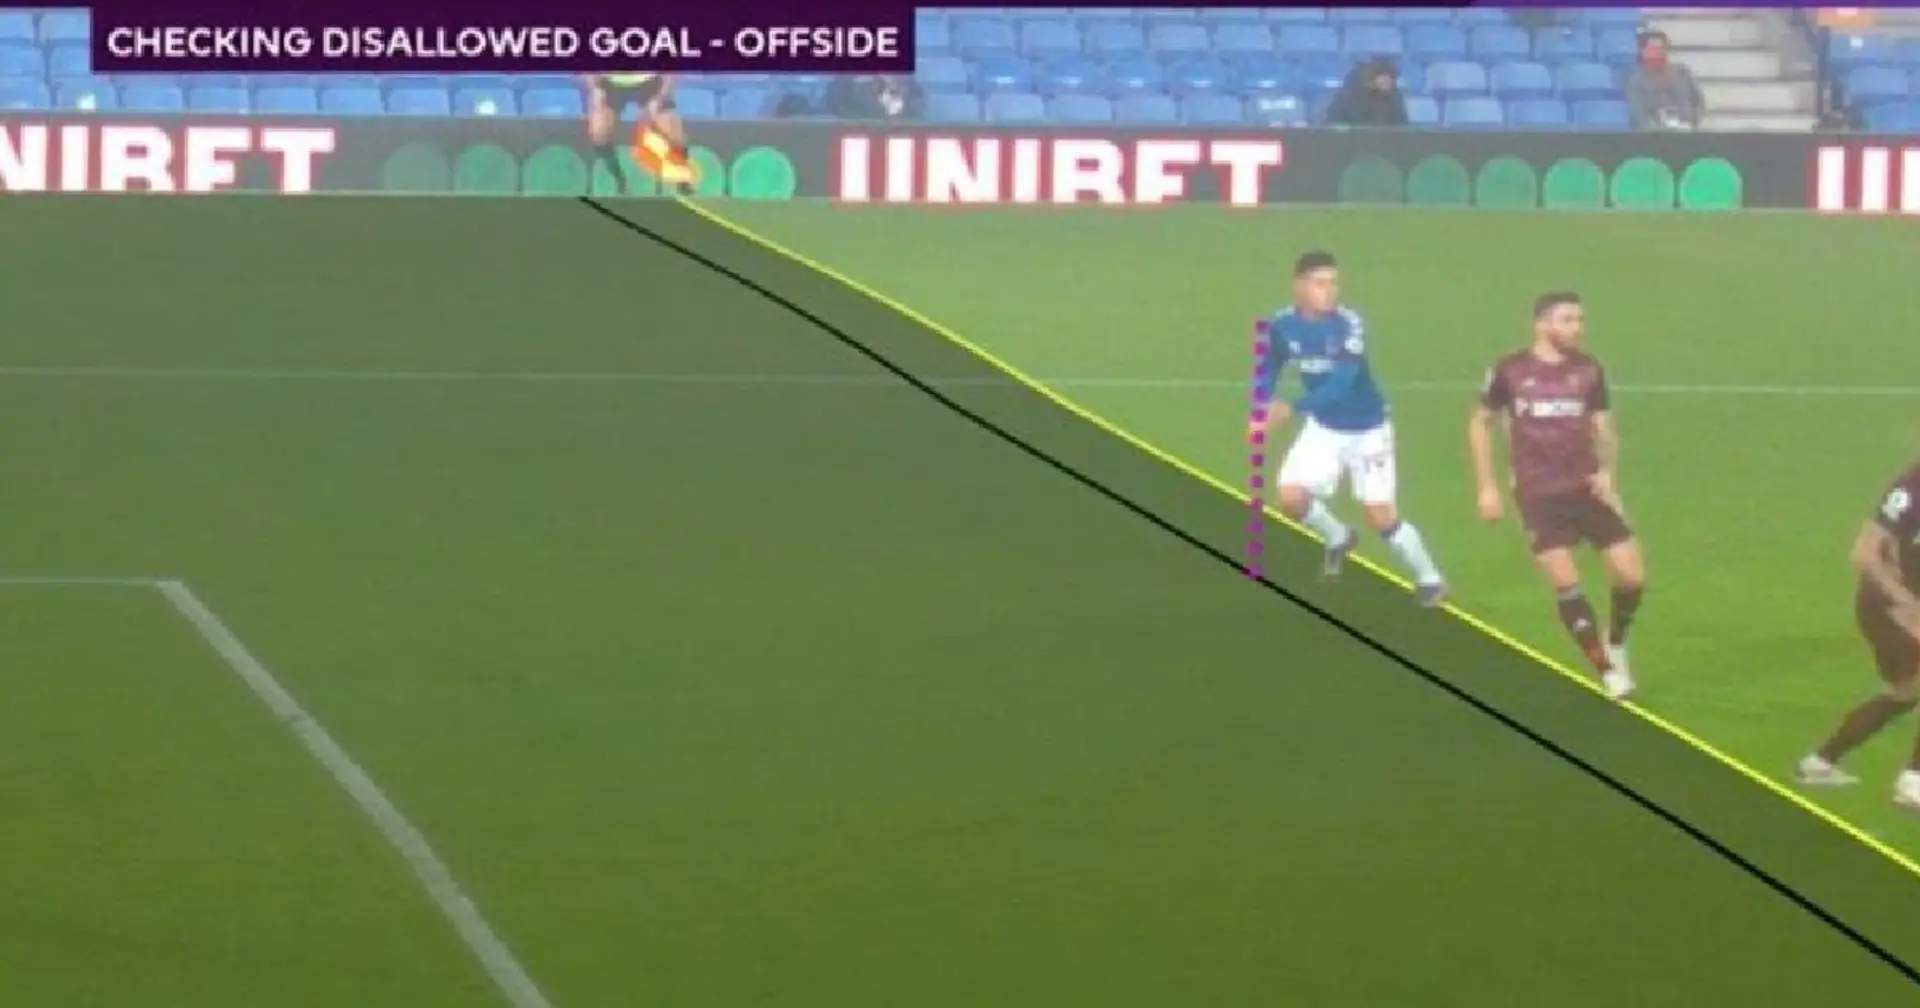 VAR is at it again: Fan points out error in its usage during Everton game